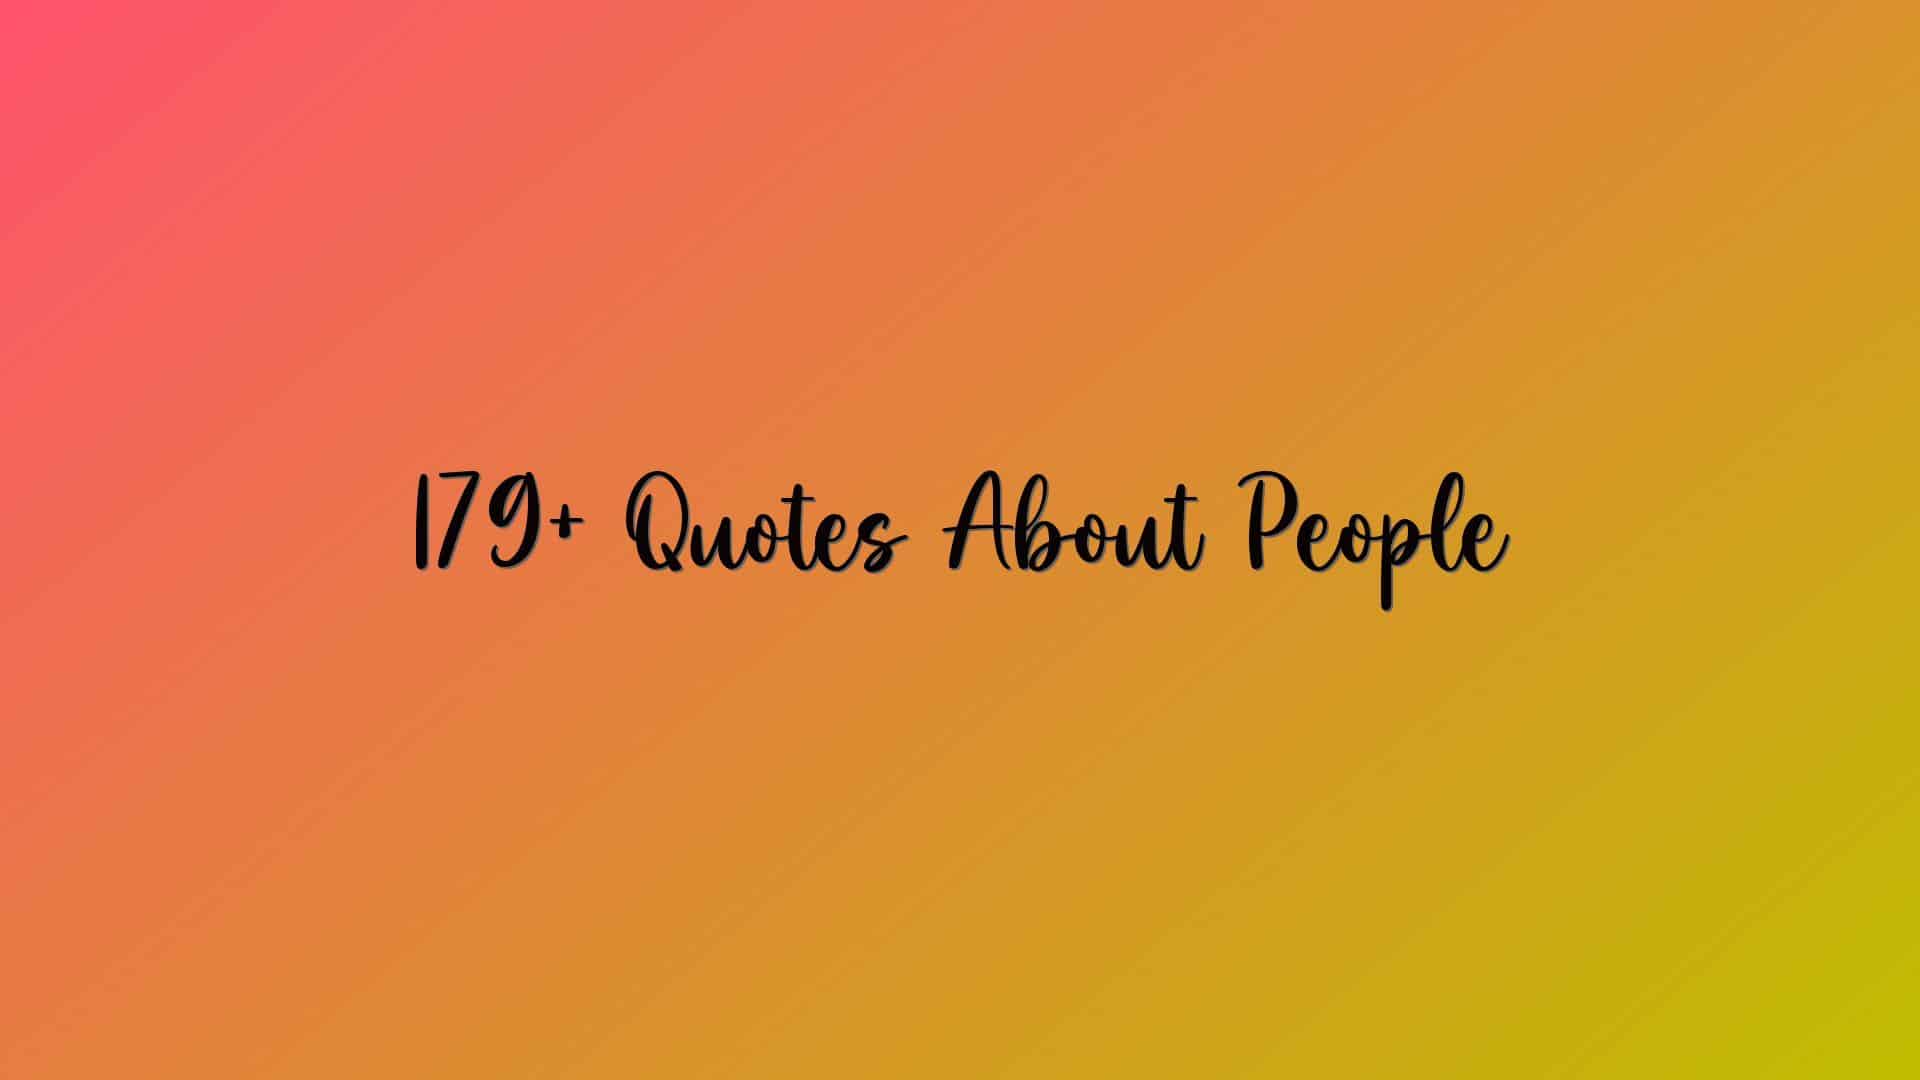 179+ Quotes About People